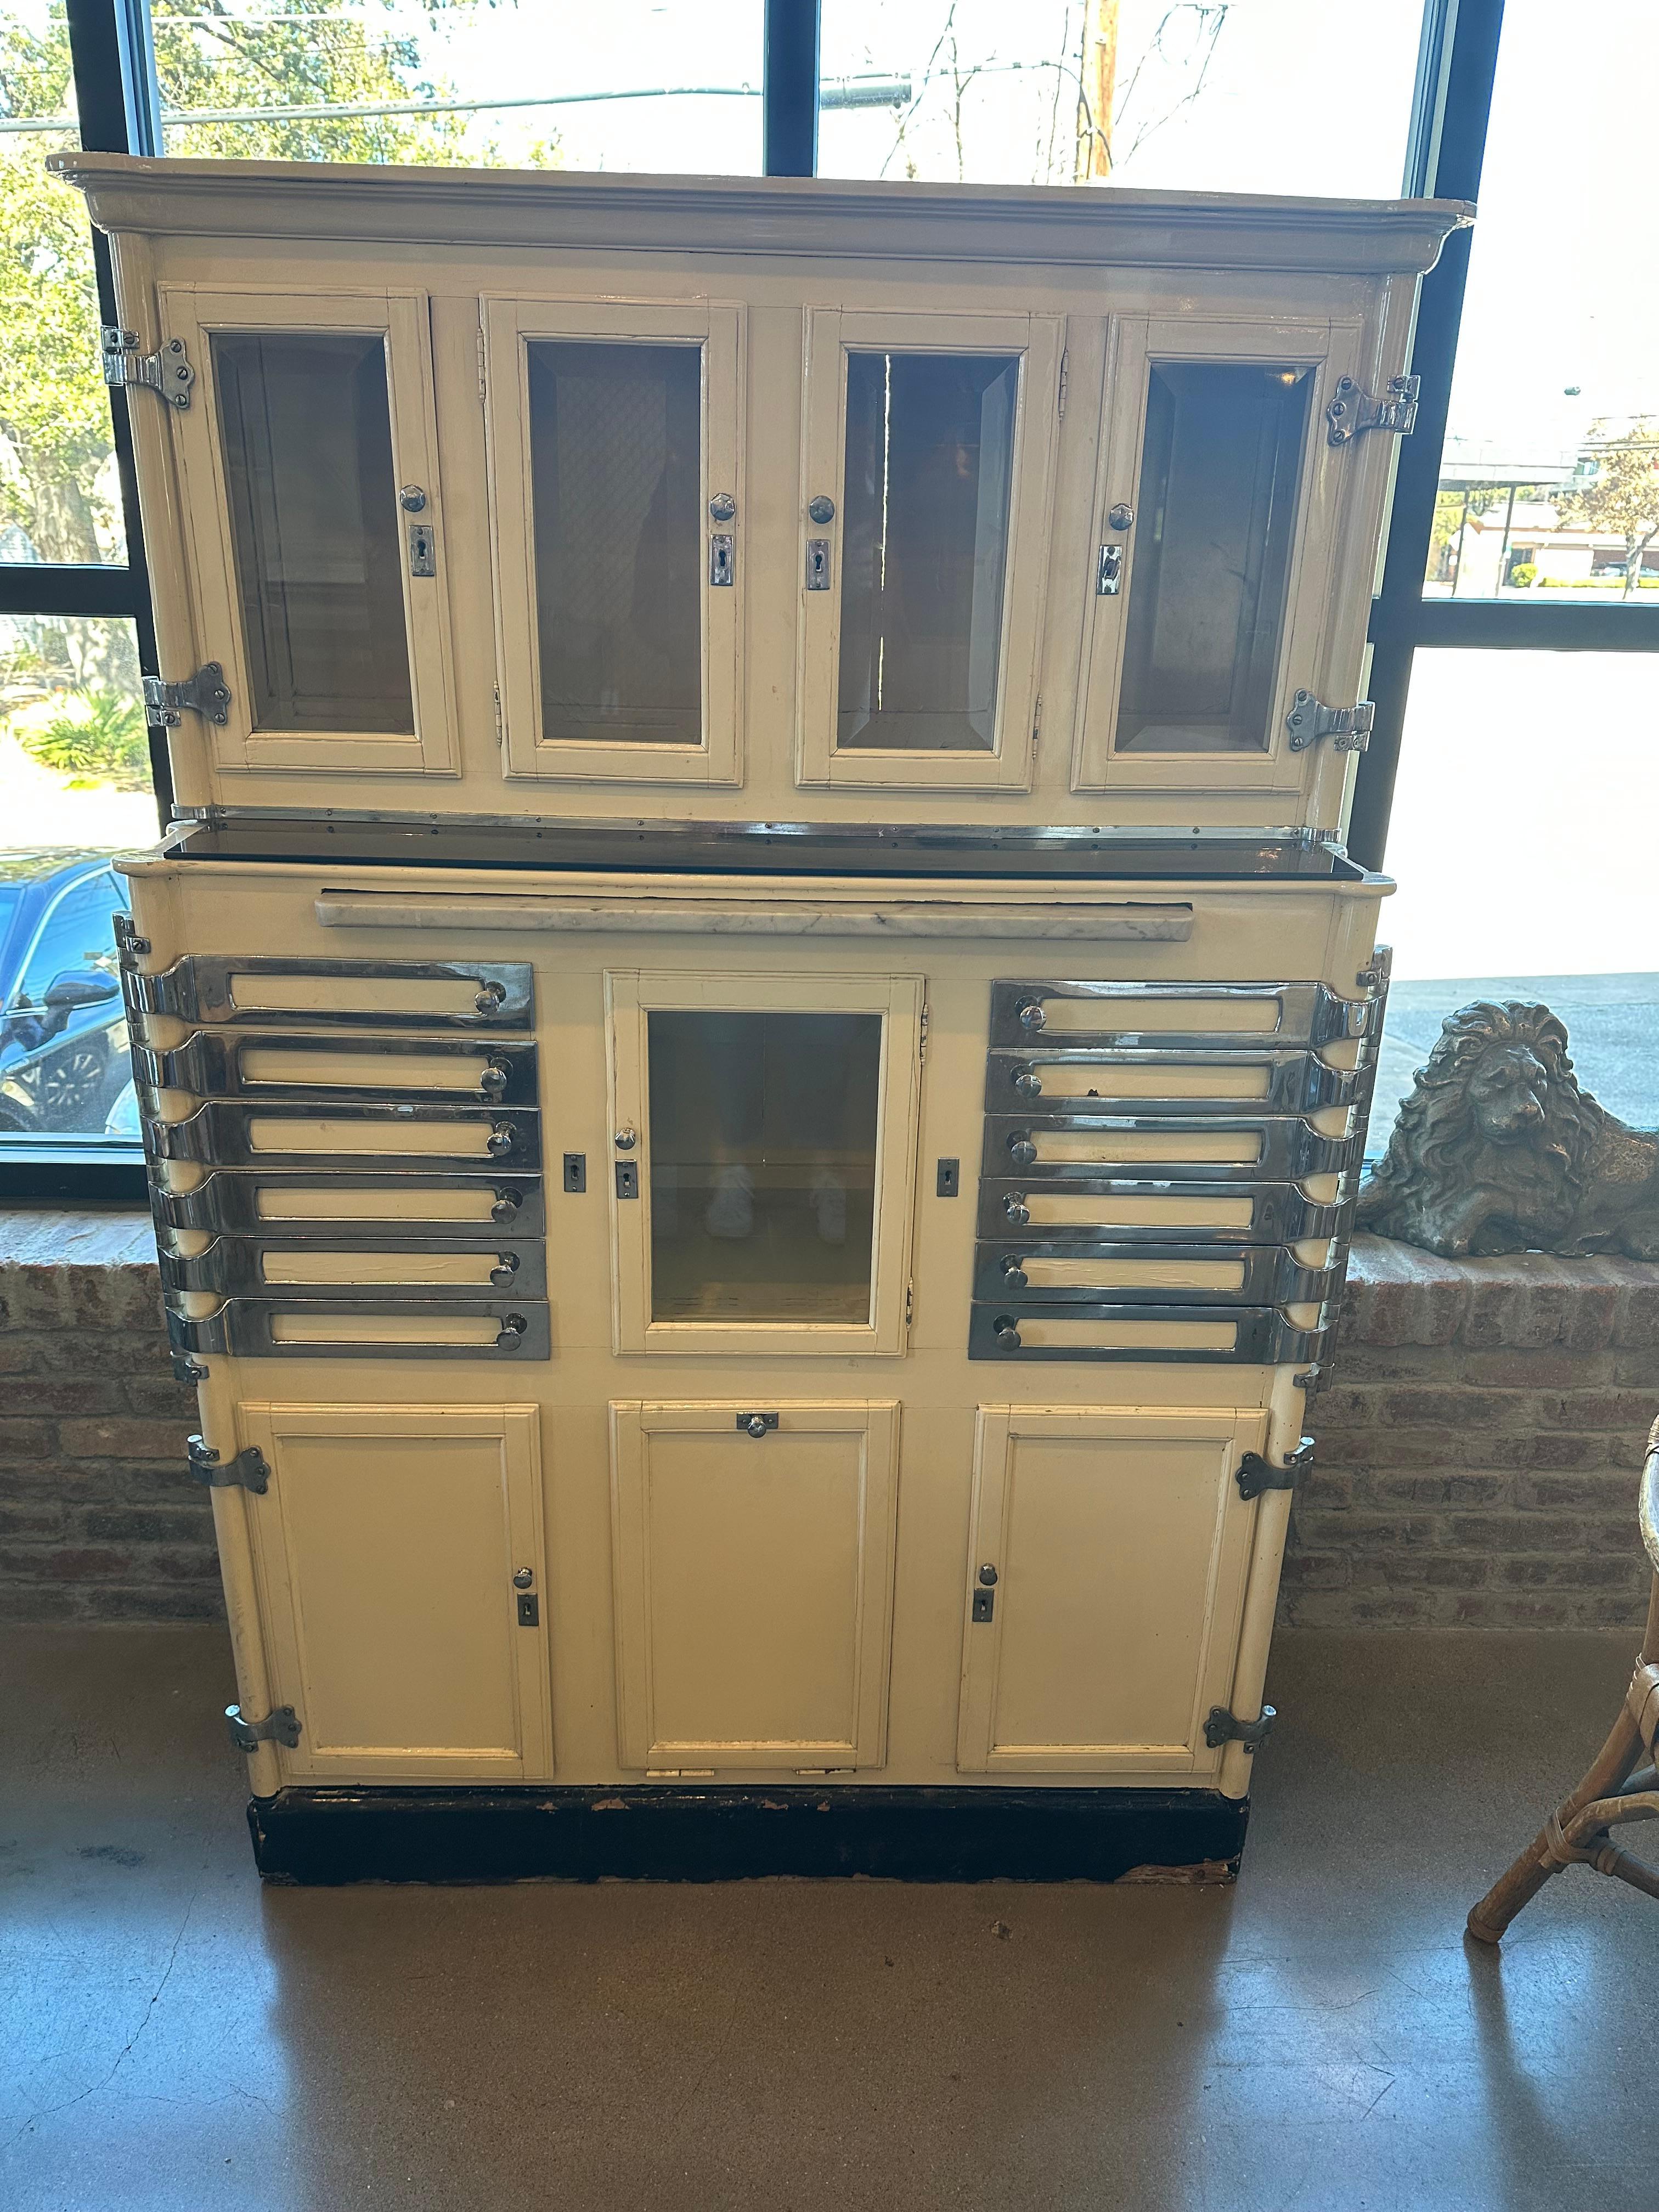 Authentic medical or dental cabinet in cream lacquer wood case with polished steel and nickel hardware. Swivel metal drawers and beveled glass doors make charming storage. Attributed to Lee Smith & Sons, makers of Aseptic dental cabinets. 1920s.